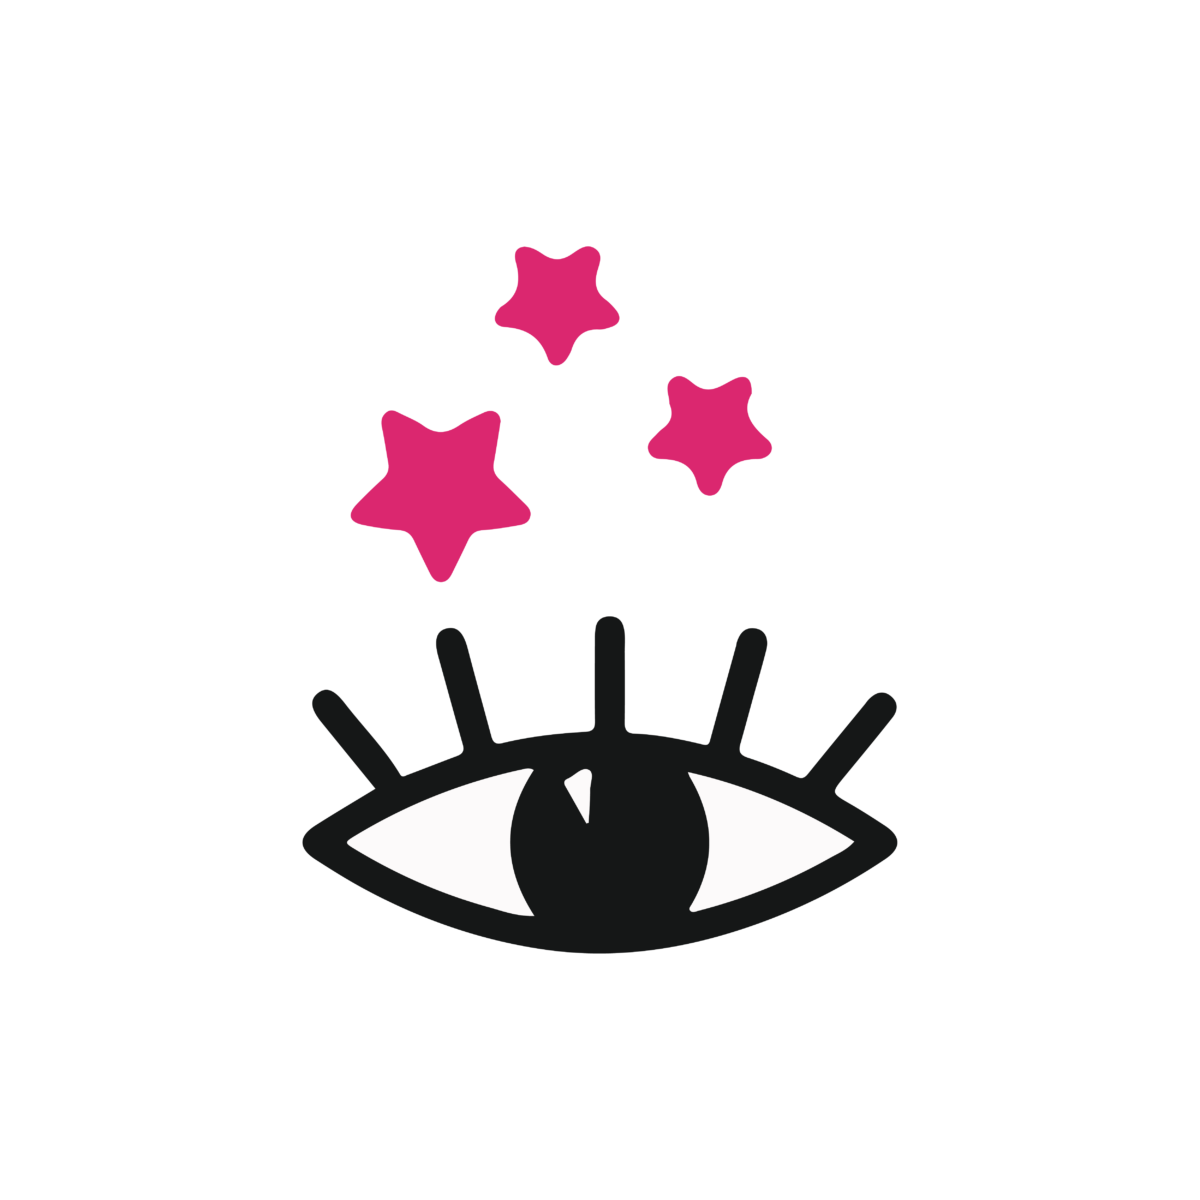 Illustration of an eyeball with three pink stars above it